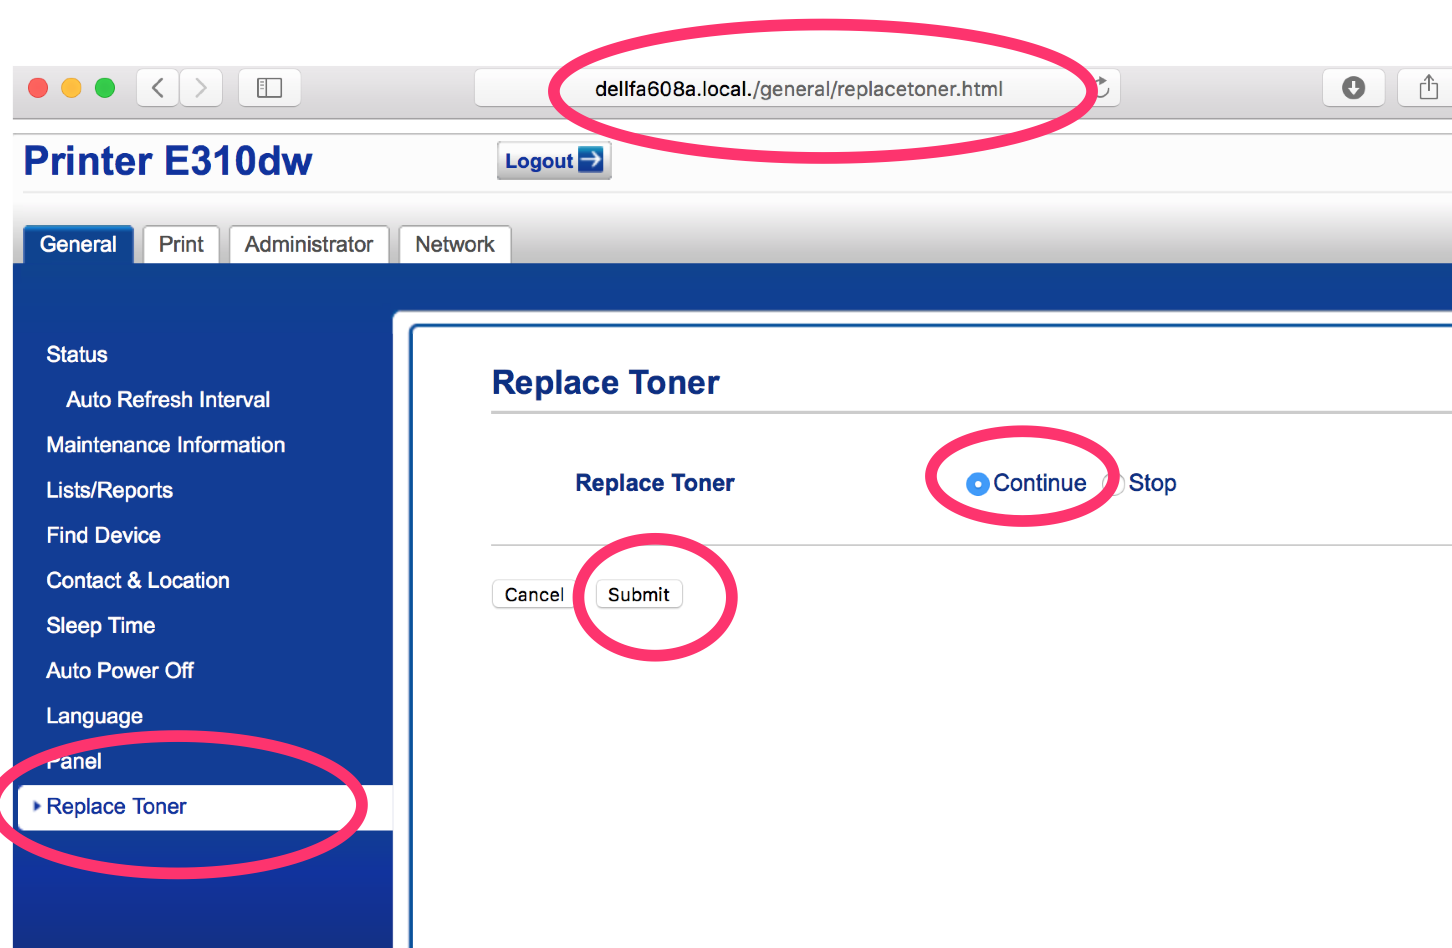 Go to http://dellfa608a.local./general/replacetoner.html, then in the Replace Toner section, select Continue, then Submit.